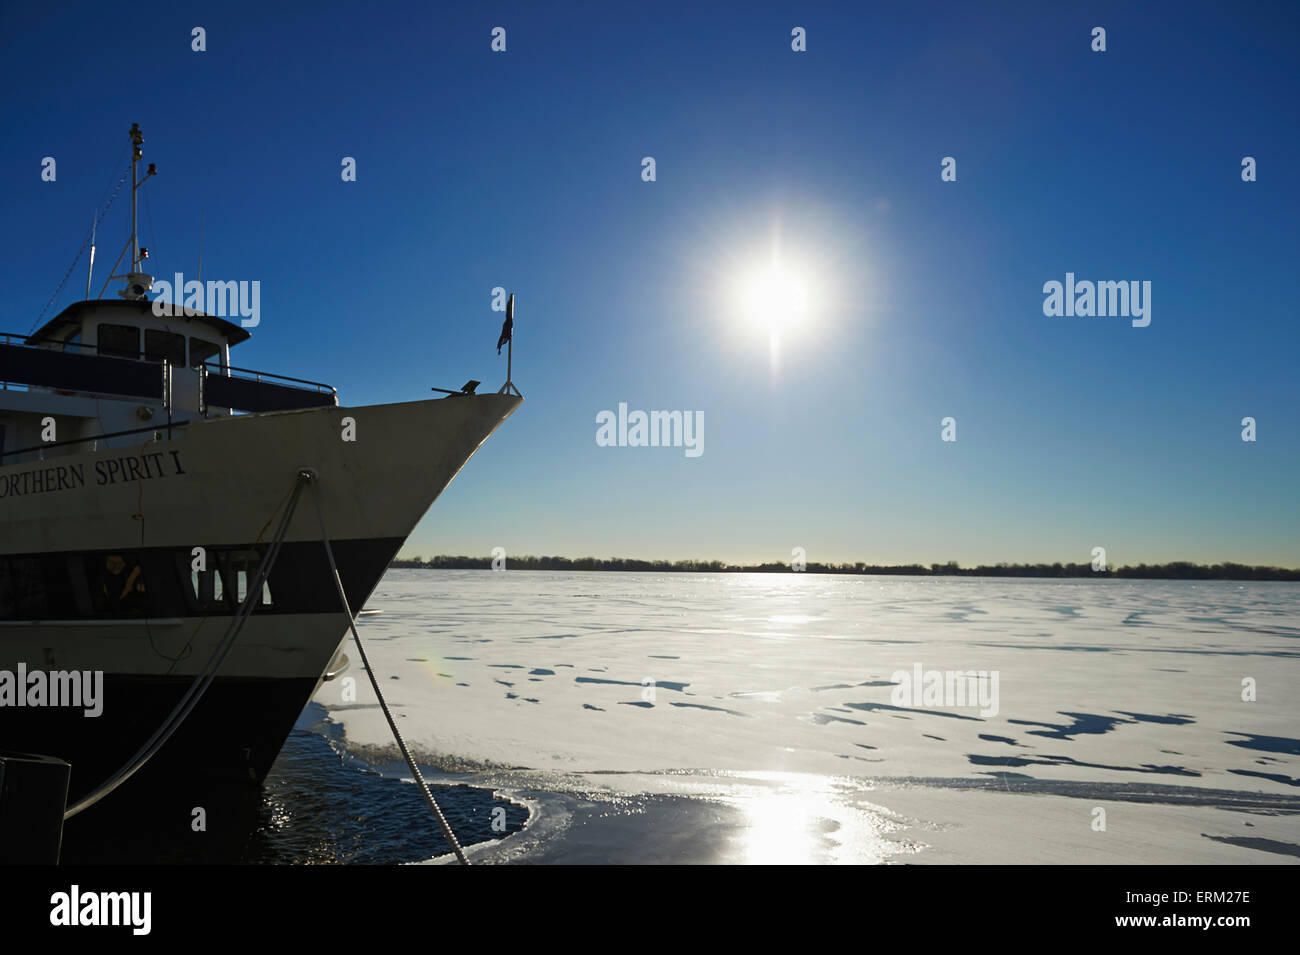 Northern Spirit tour boat moored at Harbourfront in winter; Toronto, Ontario, Canada Stock Photo